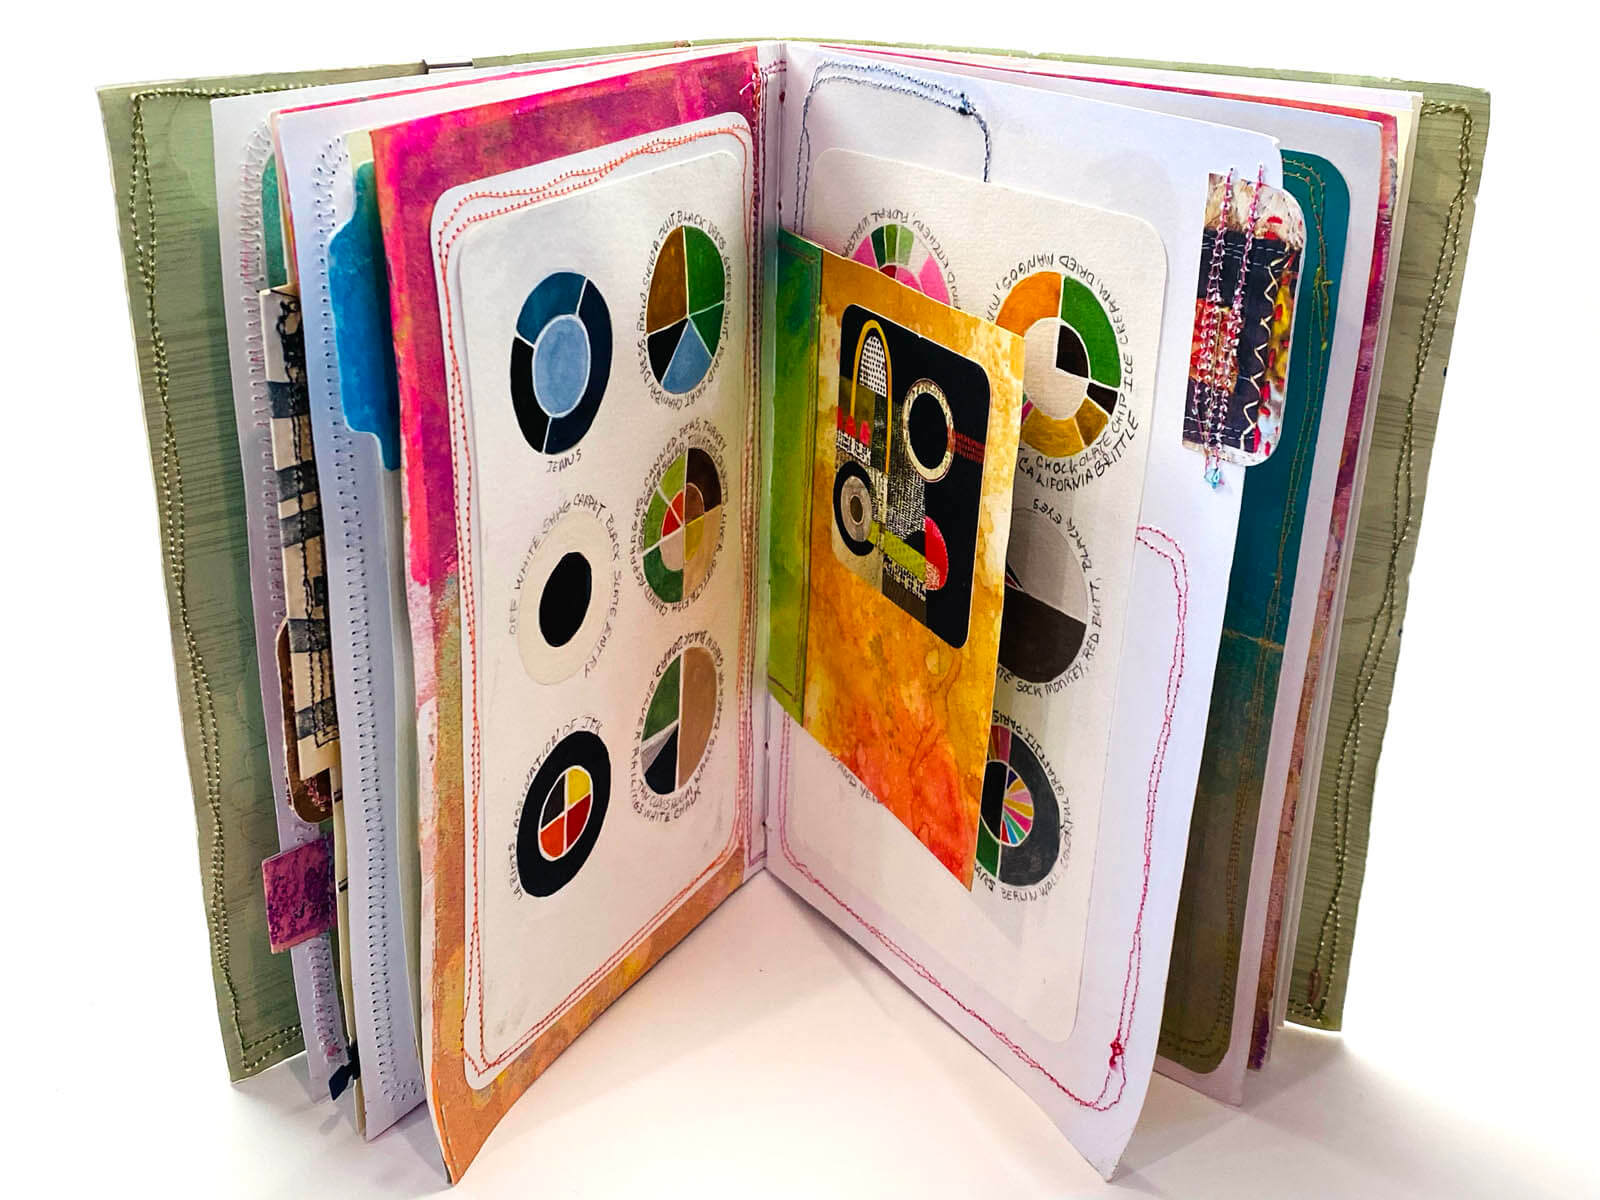 Design Extravaganza book, with the book open and colorful images on the pages - By Marsha Shaw